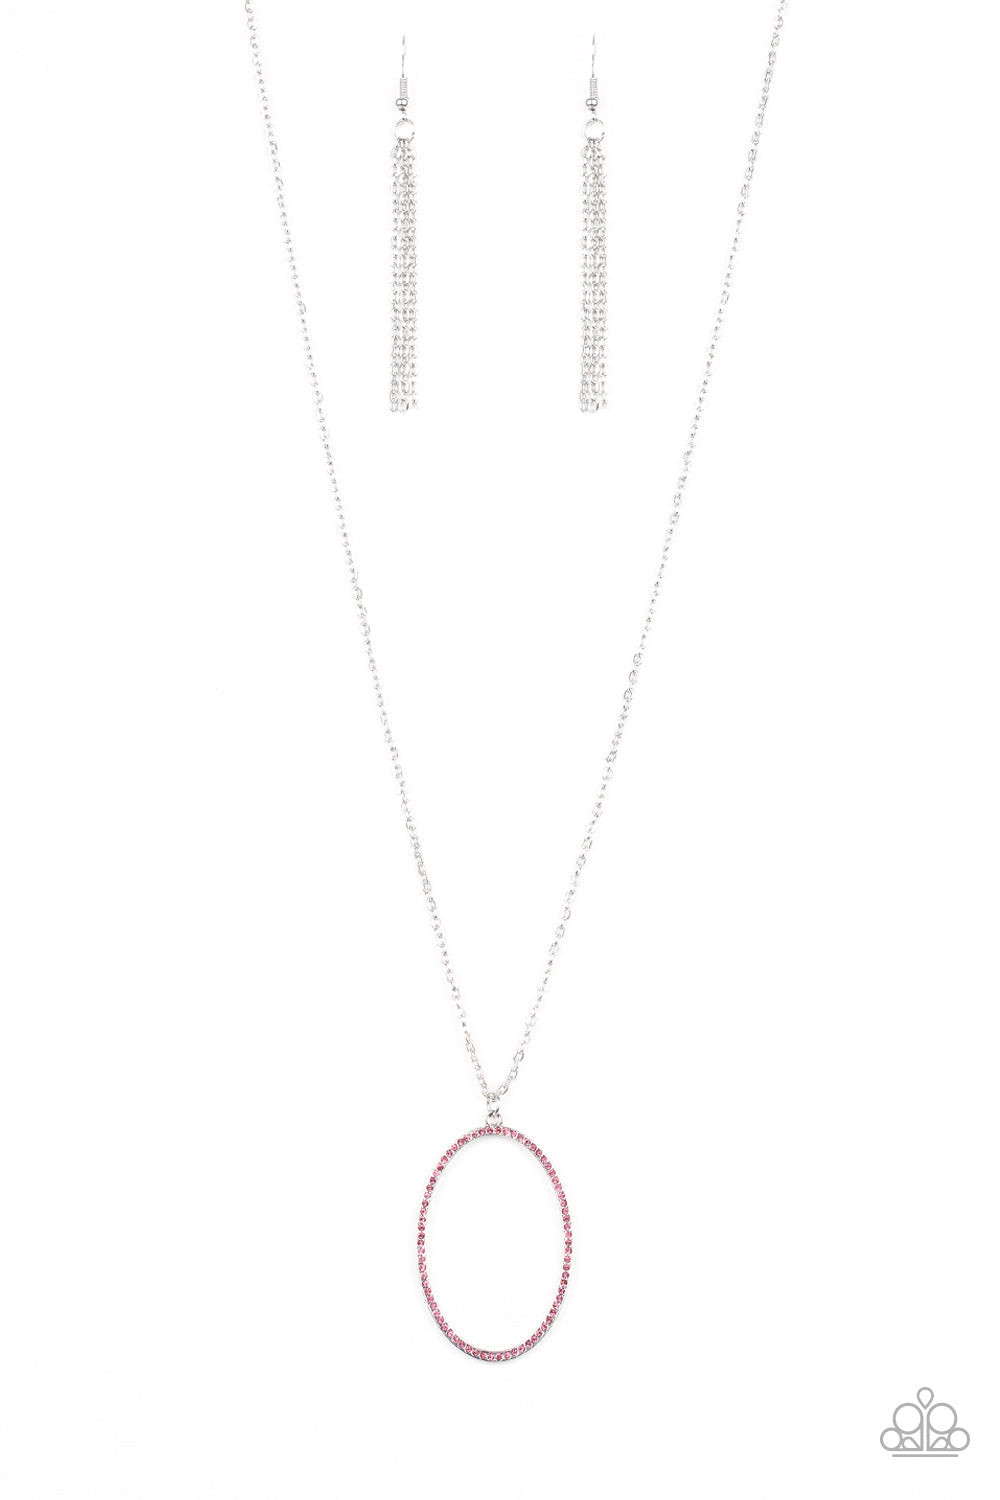 A Dazzling Distraction - Pink and Silver Necklace - Paparazzi Accessories - Glassy pink rhinestones, an airy silver hoop swings from the bottom of a lengthened silver chain for a refined flair. Features an adjustable clasp closure.